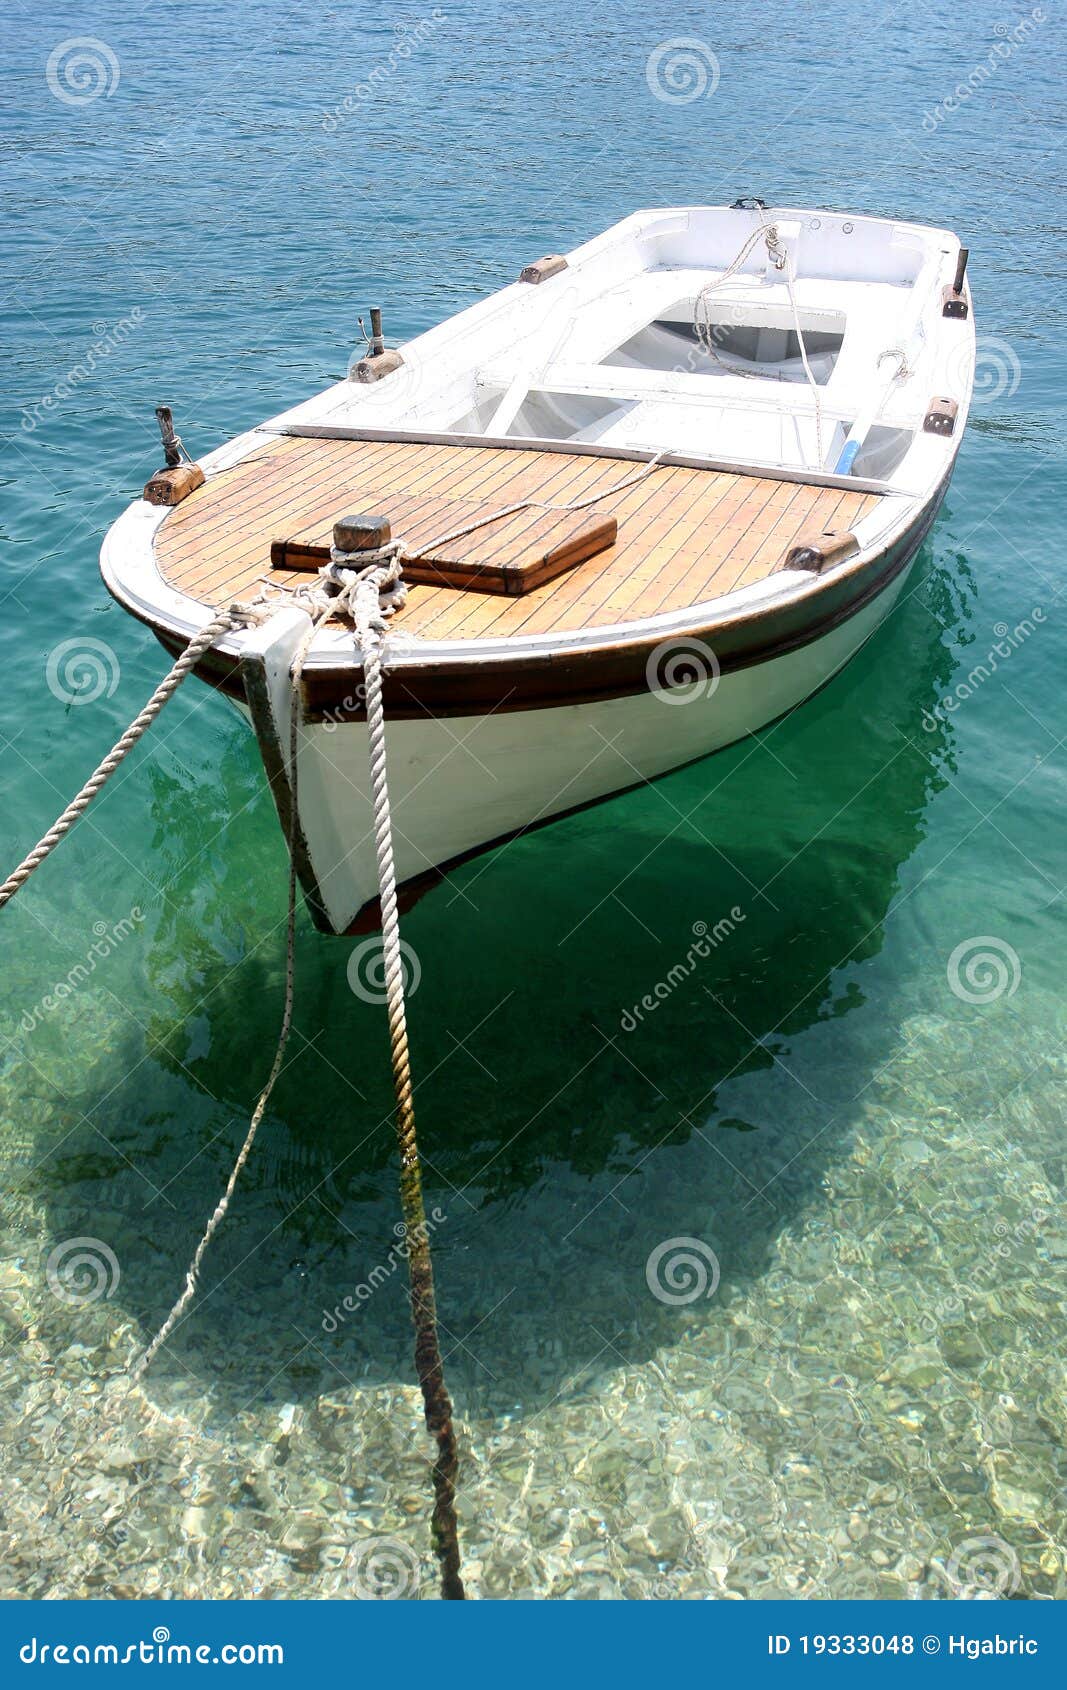 old wooden boat dock, going far out to sea. stock photo